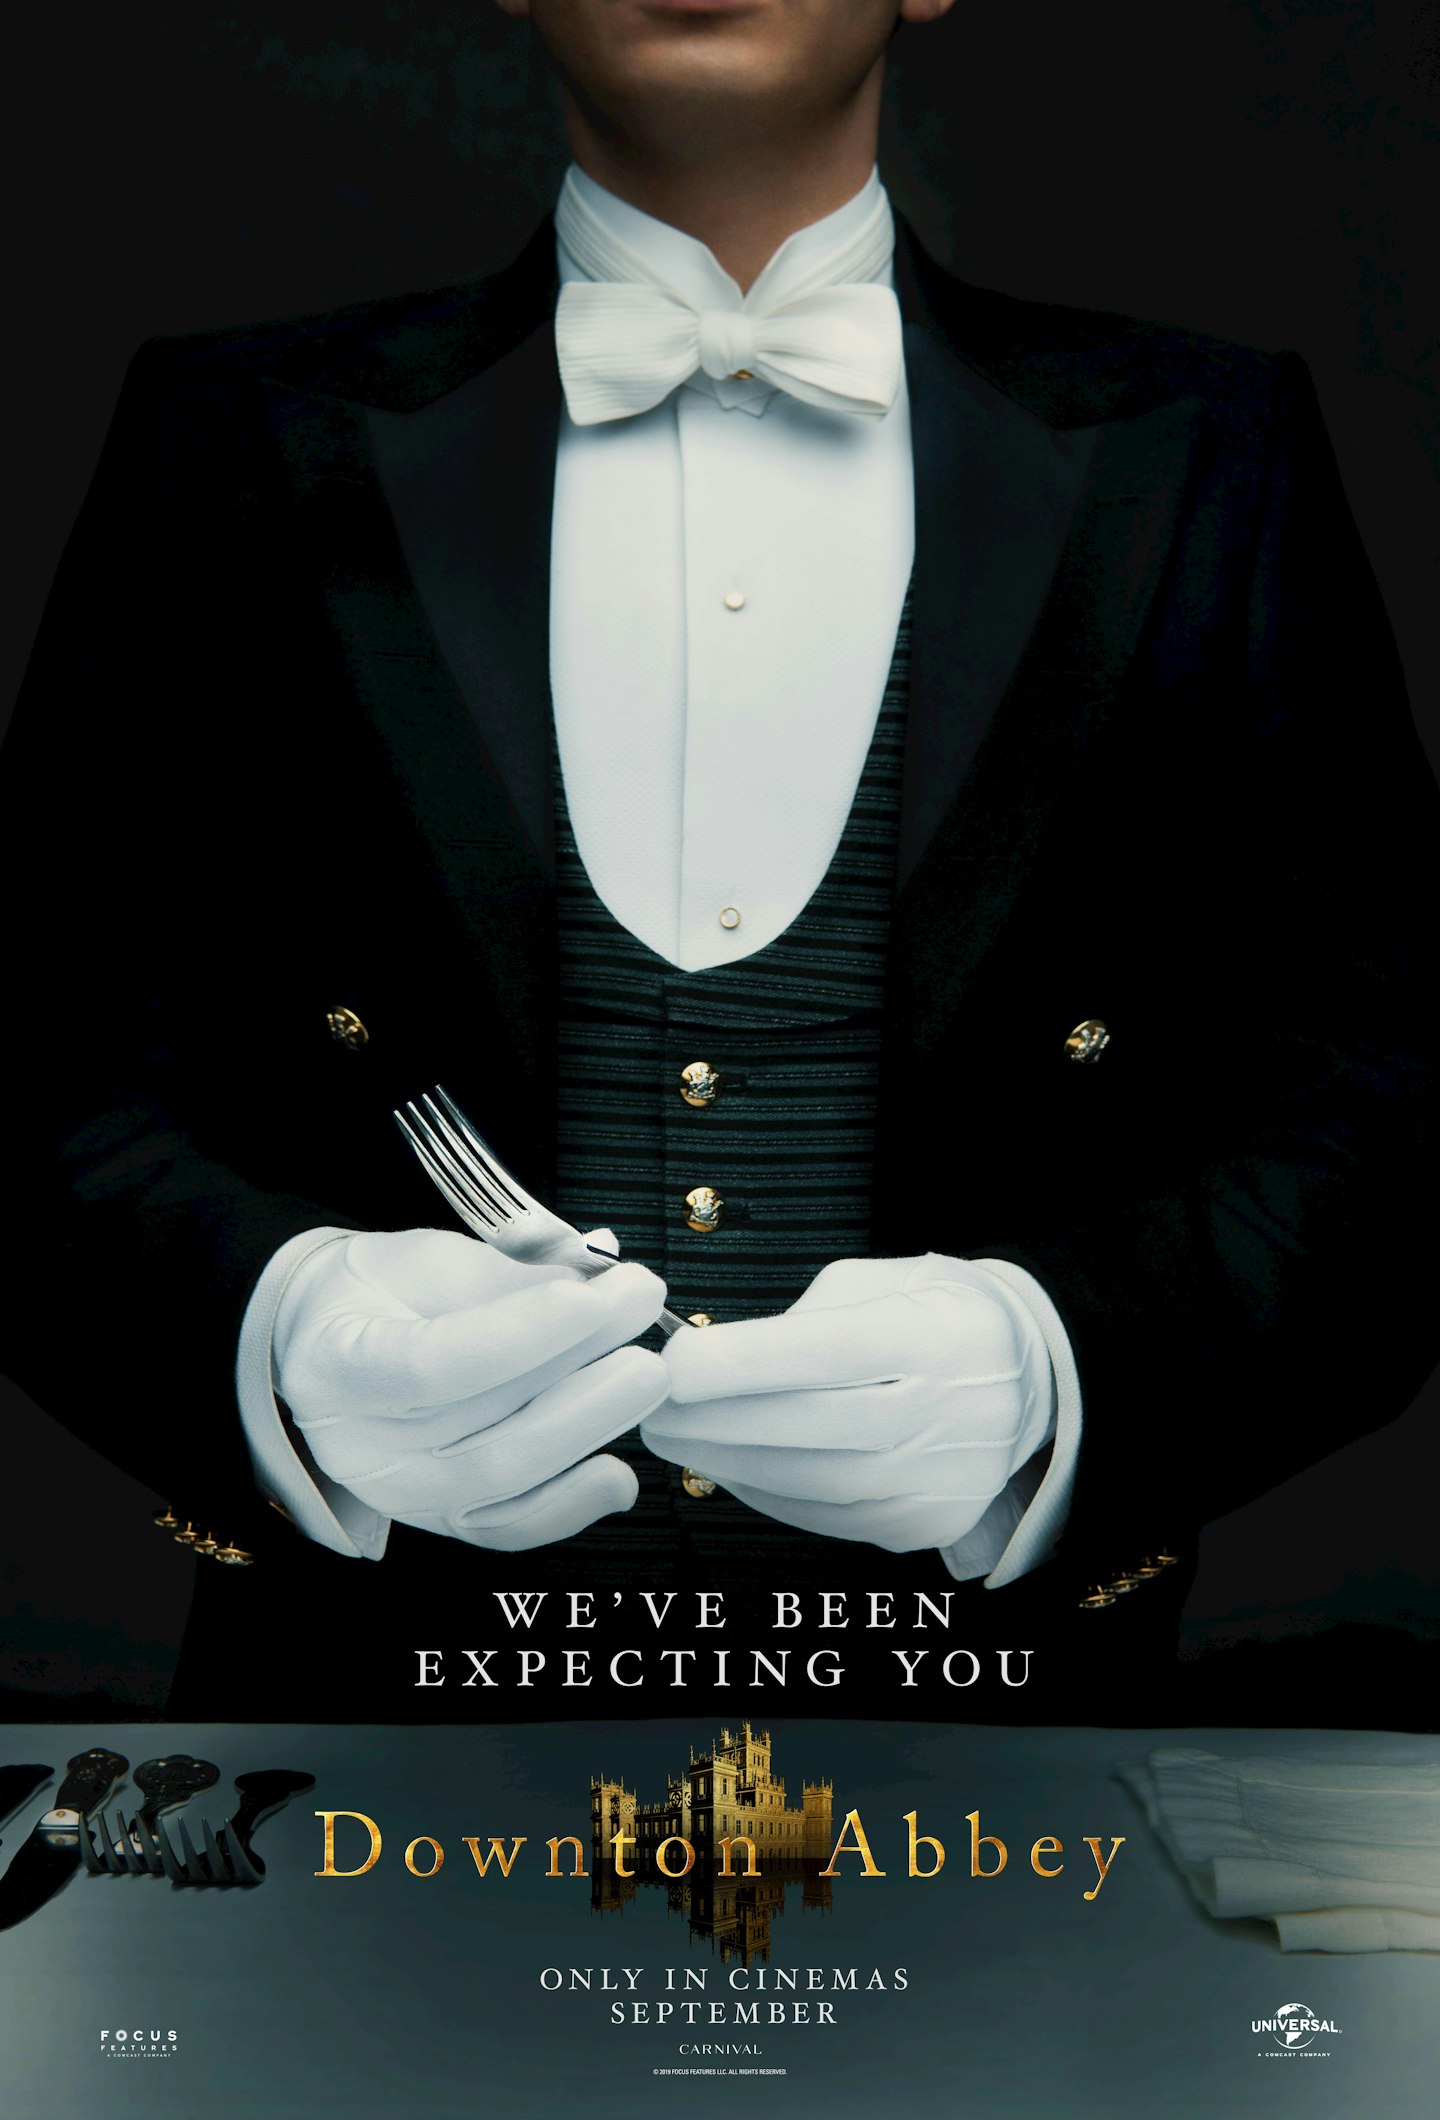 Downton Abbey character posters